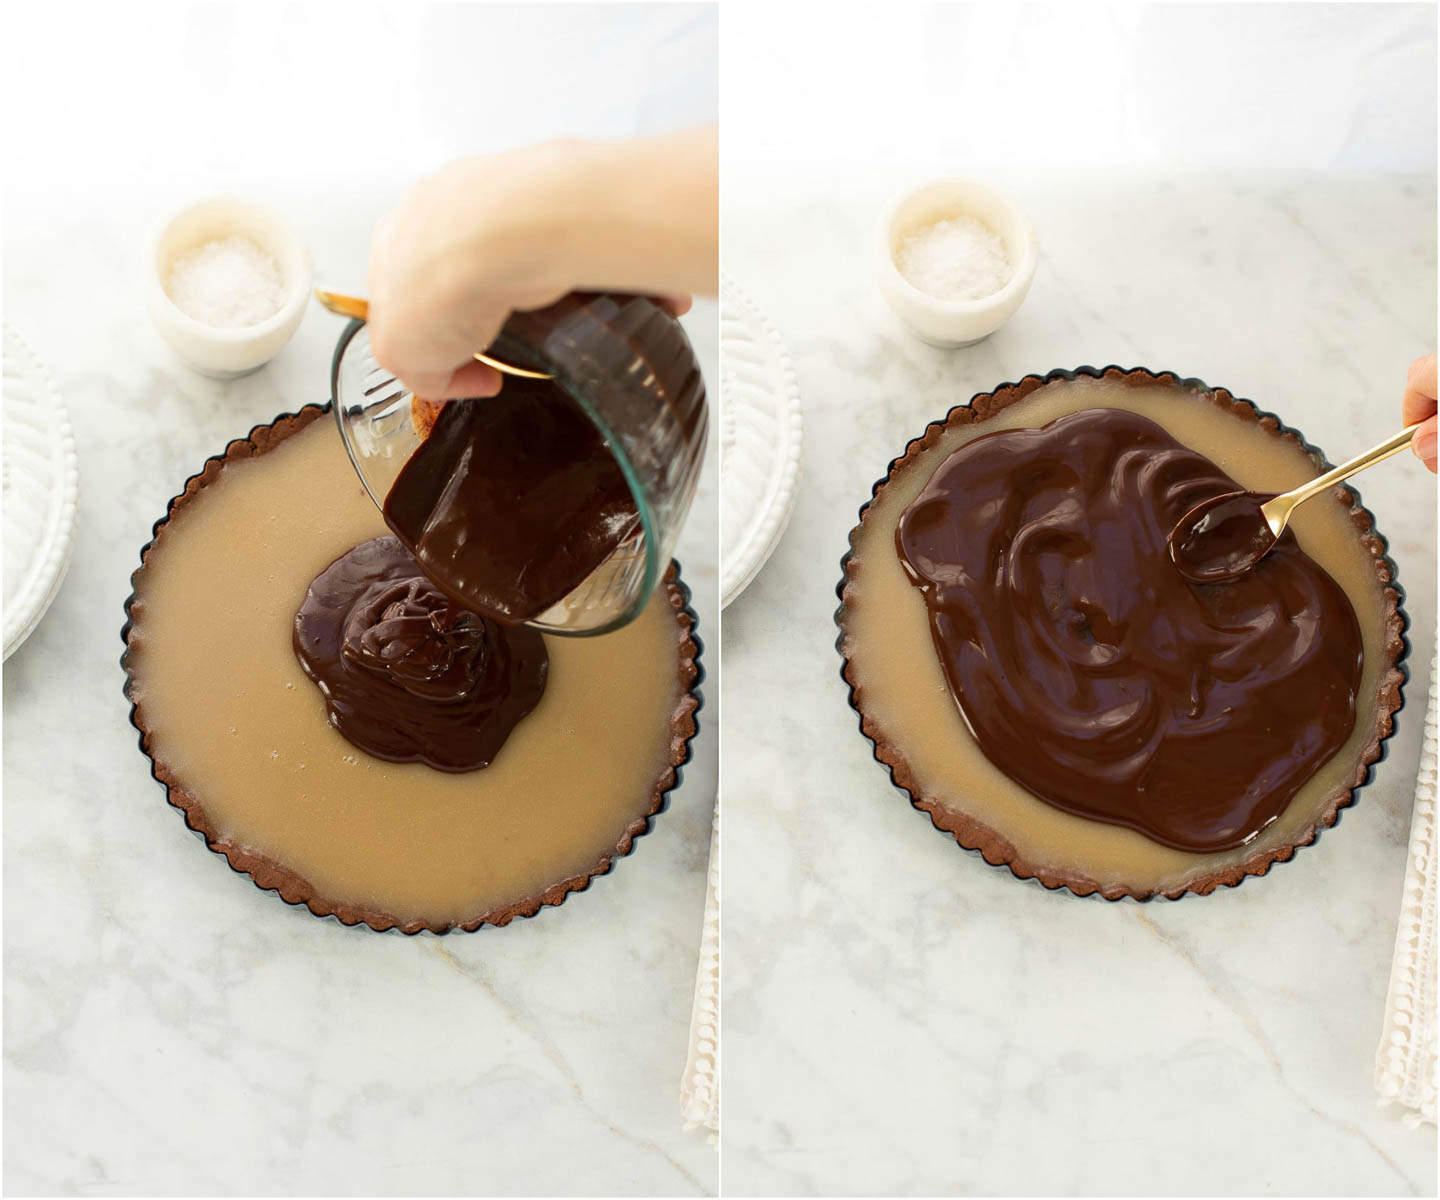 spreading chocolate over caramel layer